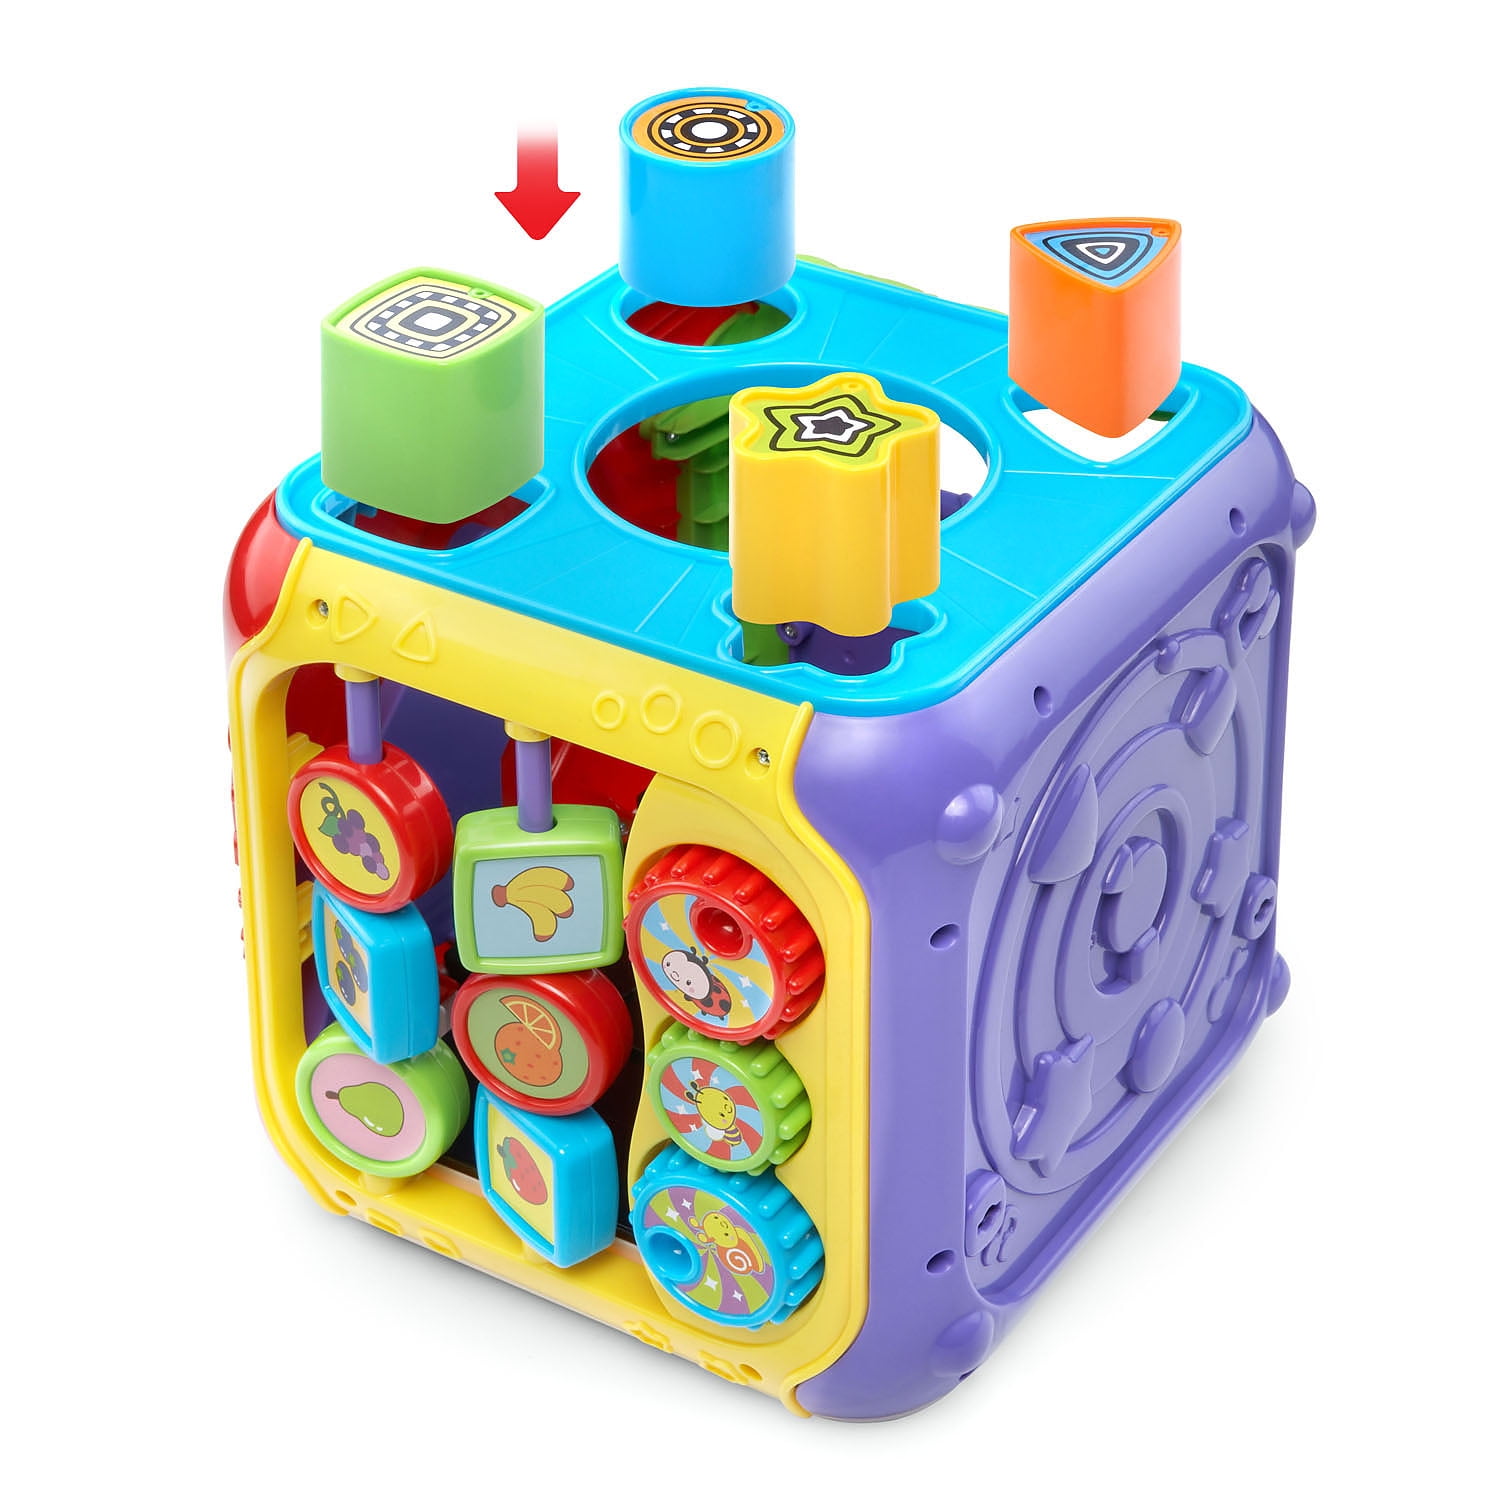 VTech Little Friendlies Discovery Ball Cube Baby Activity Toy for sale online 